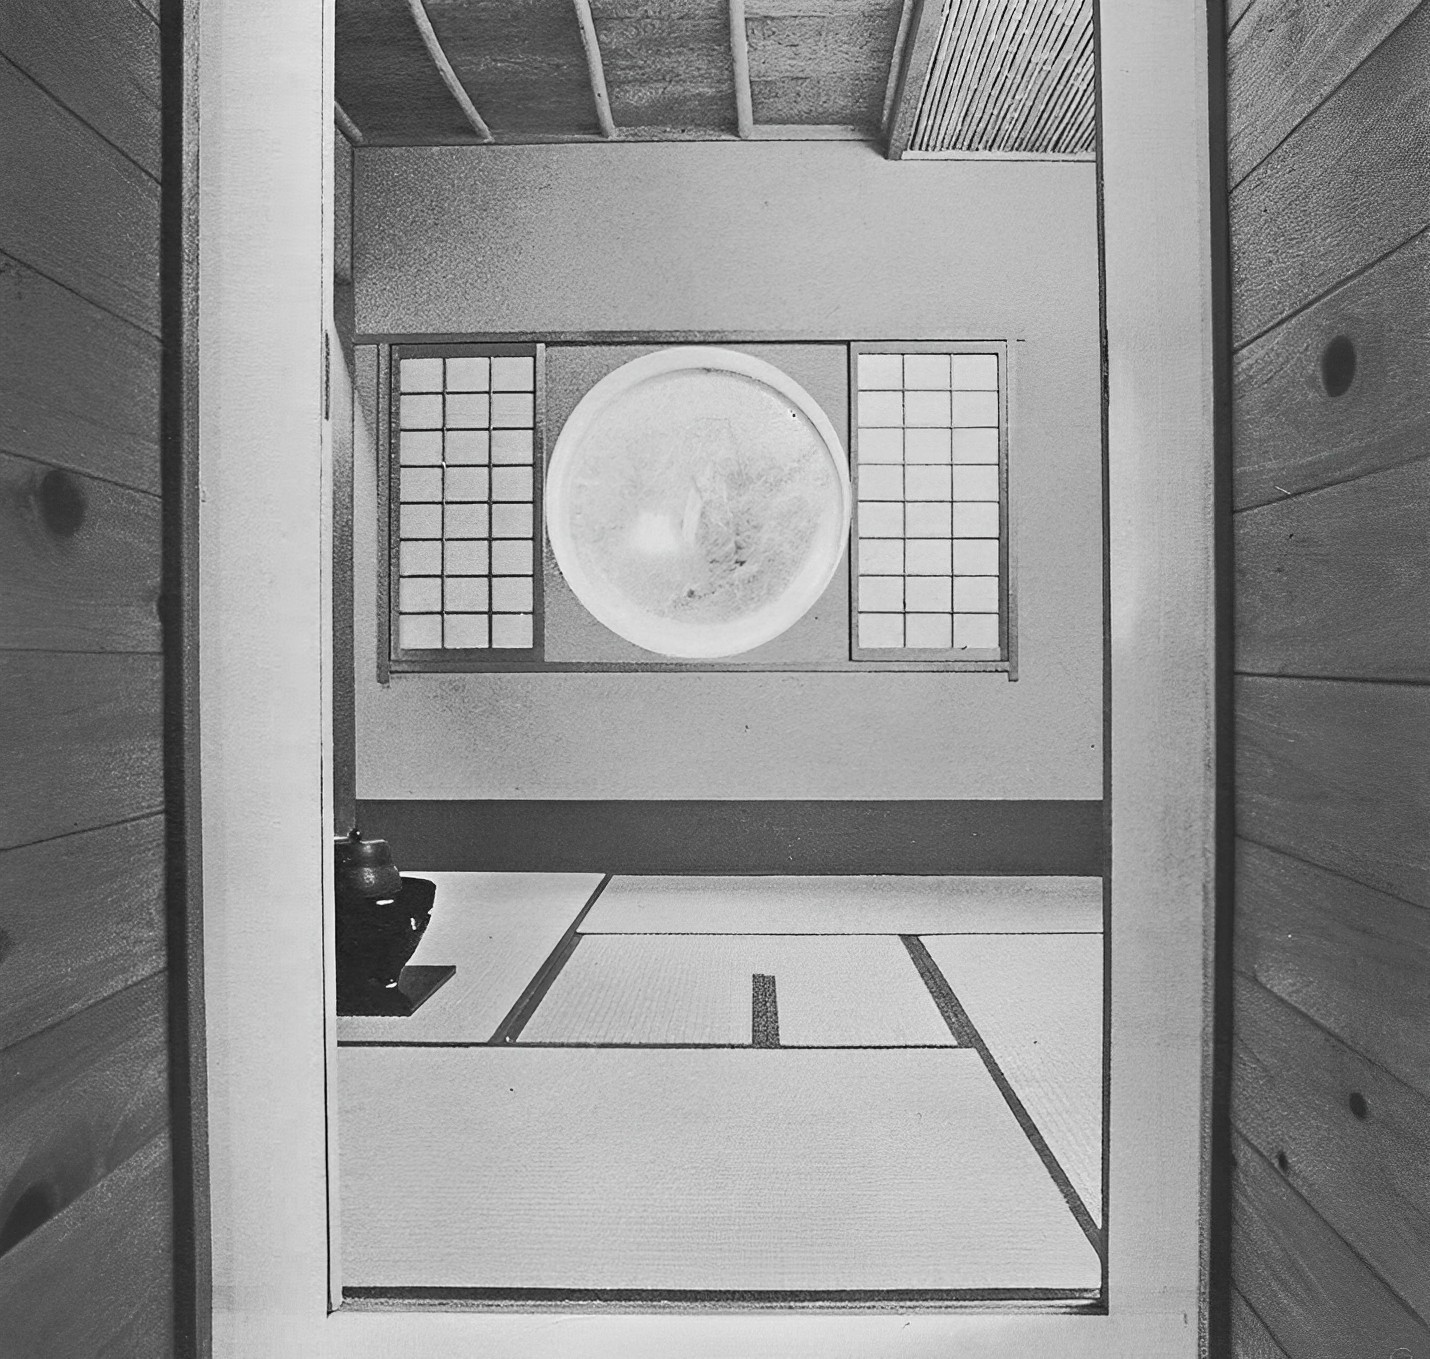 (7) Capsule House 'K'. Kurokawa’s summer house at Karuisawa, 1972, is a steel capsule on the outside with imitation wooden beams on the inside. The interior here is a traditional tea ceremony room with 4½ tatami mats and shoji, sliding translucent windows. The round windows, reminiscent of washing machines to us, crystallize both ancient and modern meanings, a good example of what Kurokawa calls ‘antagonistic coexistence’.